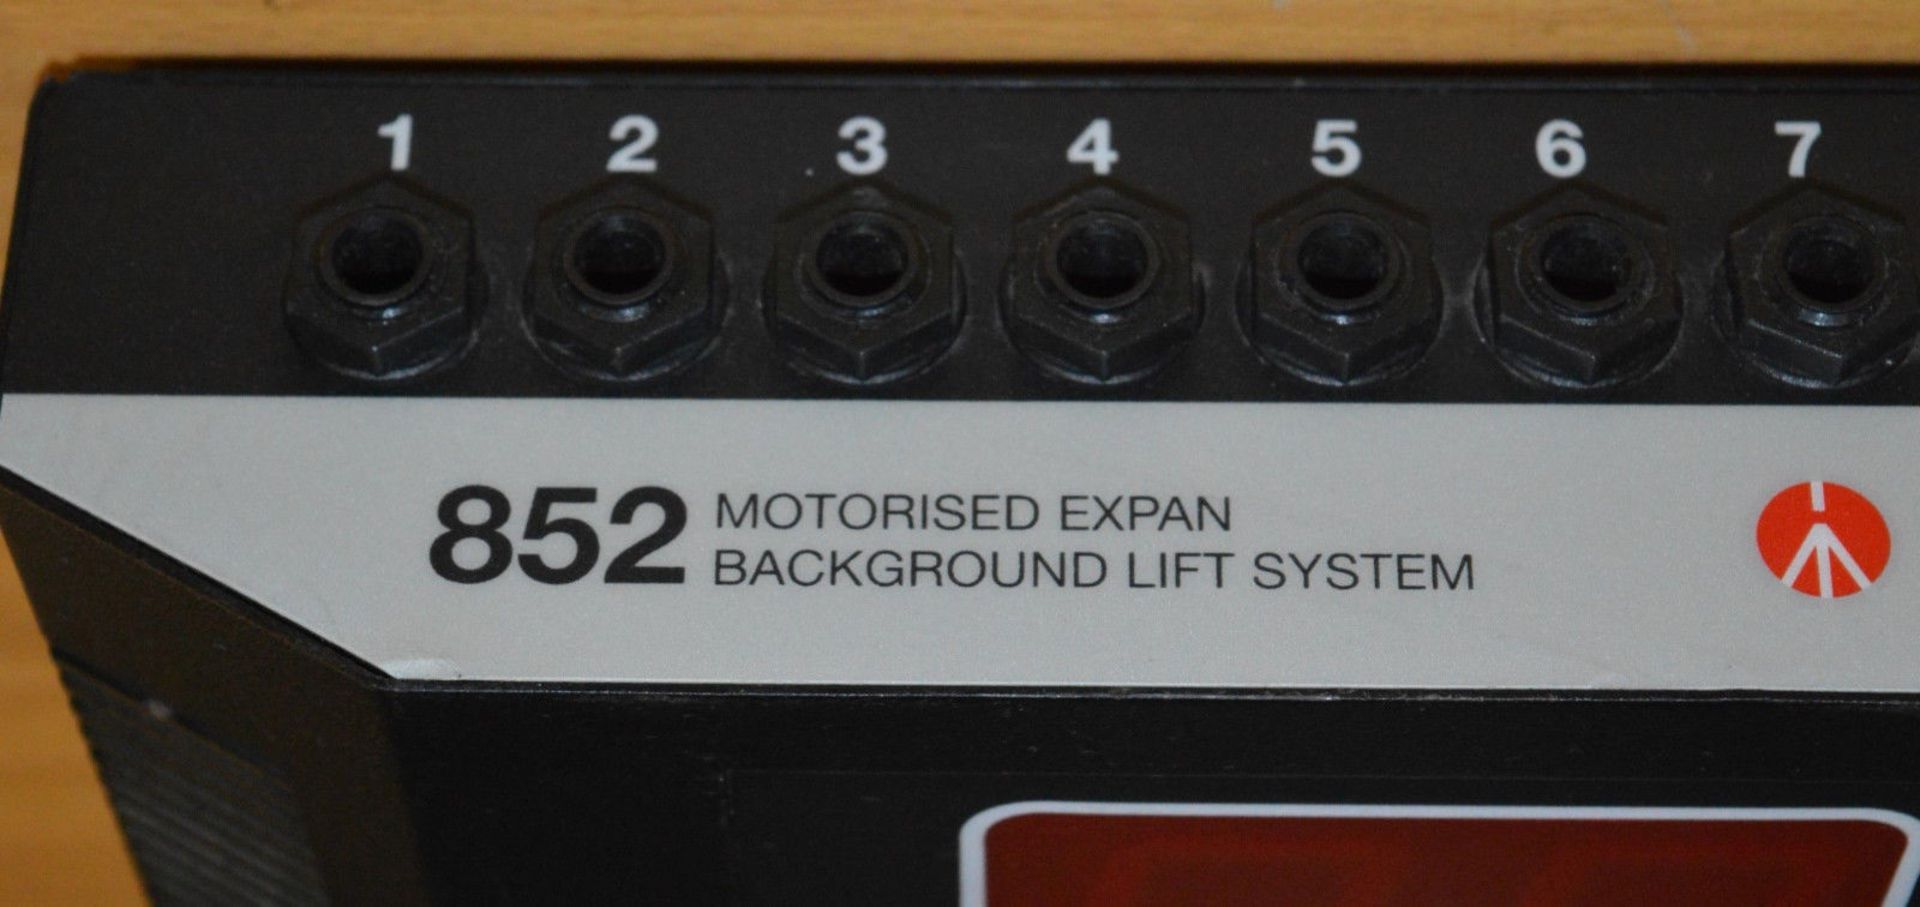 1 x Manfrotto 852 Motorised Expan Photography Background Lift System - Ideal for use in - Bild 4 aus 6